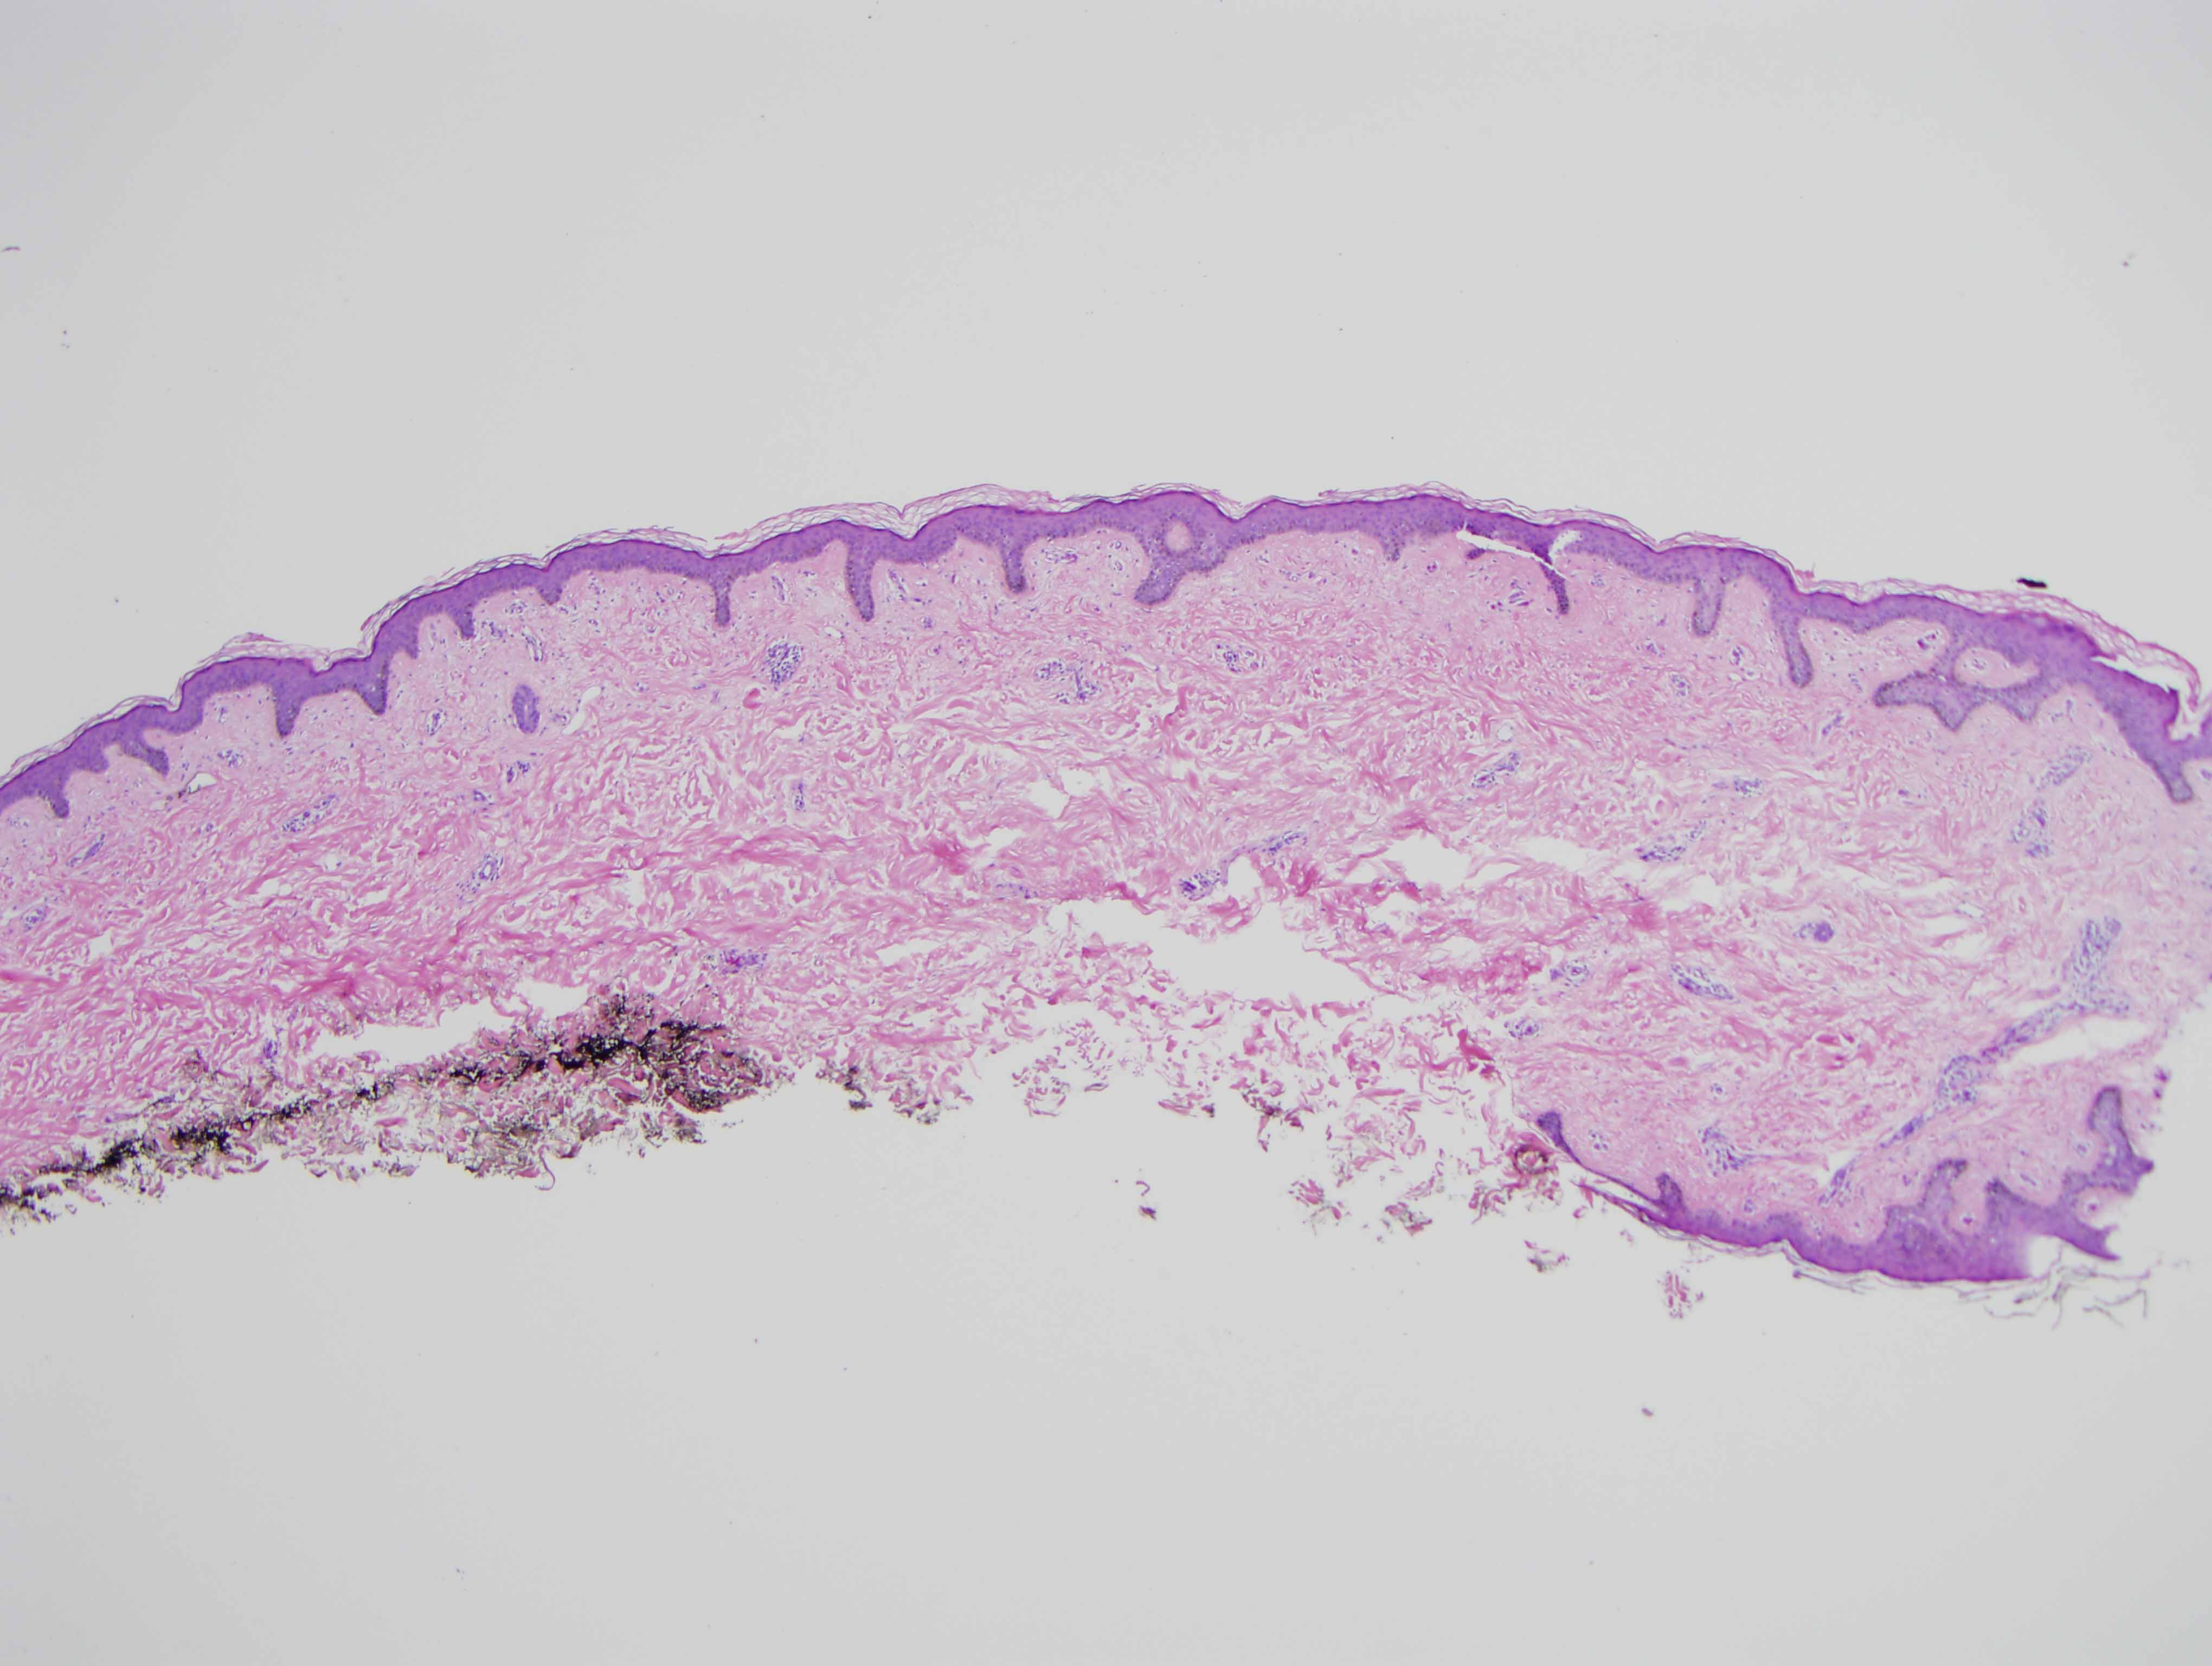 Slide 1: The bisected excision specimen shows a somewhat attenuated epidermis.